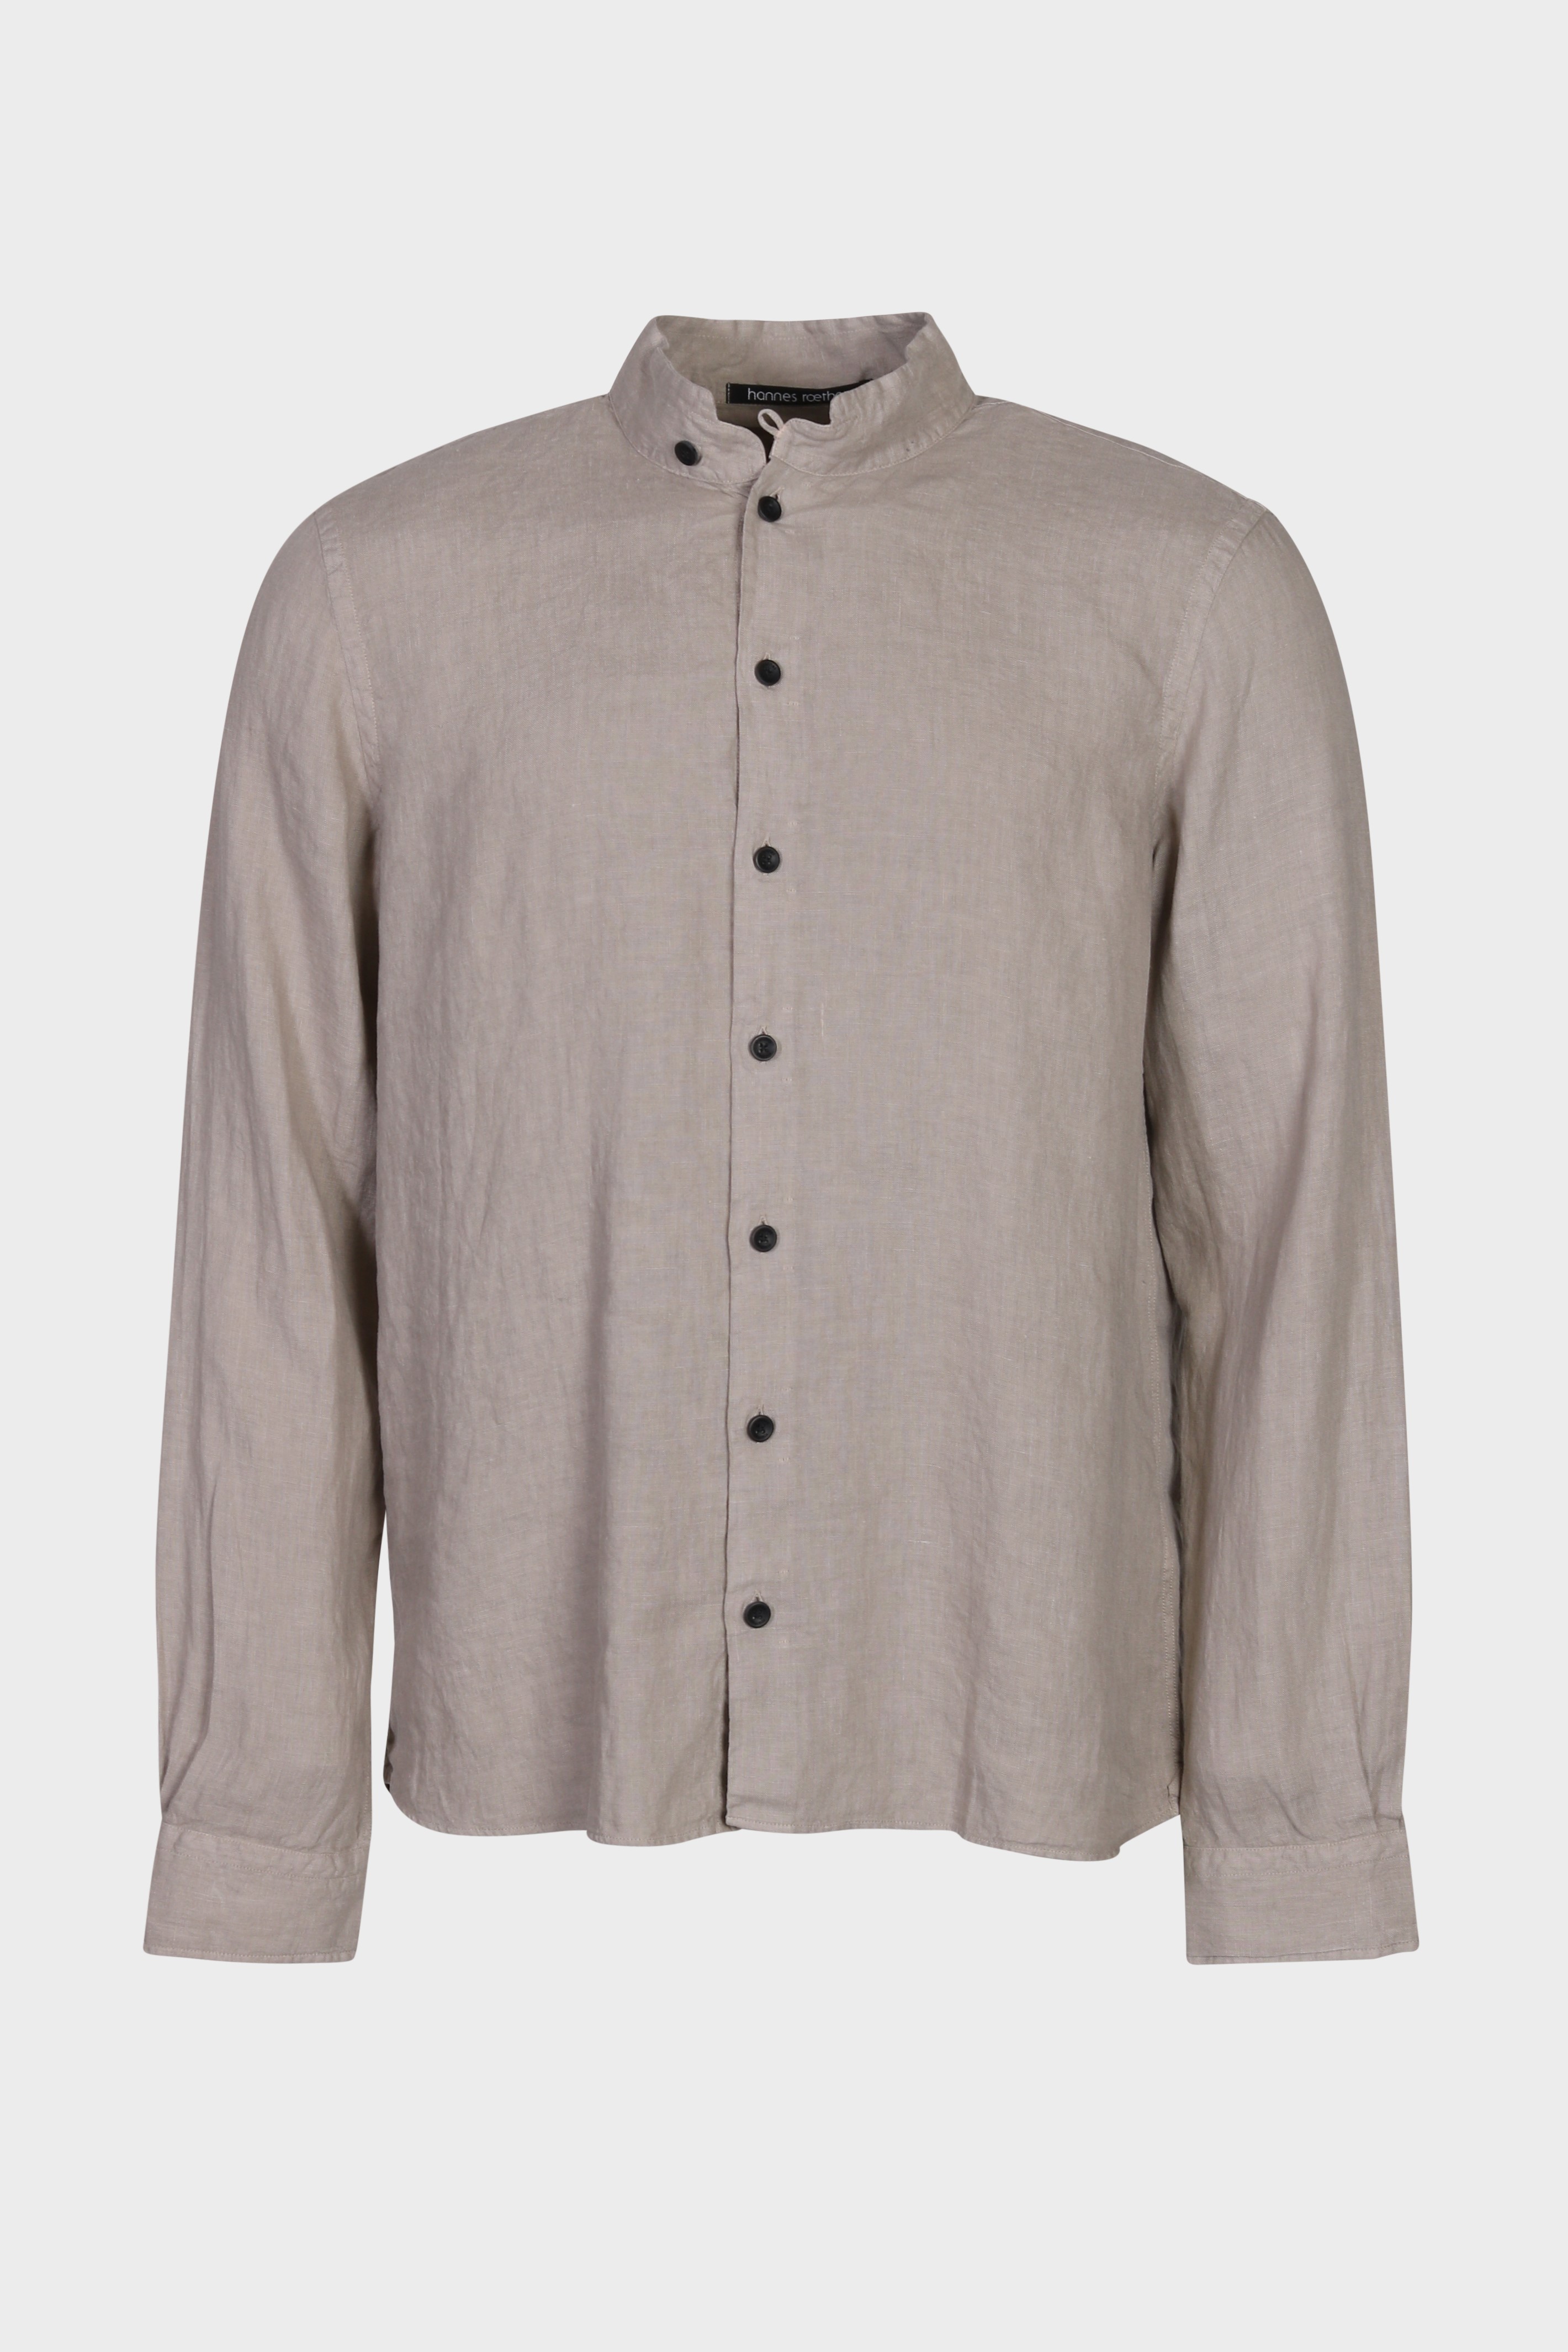 HANNES ROETHER Linen Shirt in Light Grey L